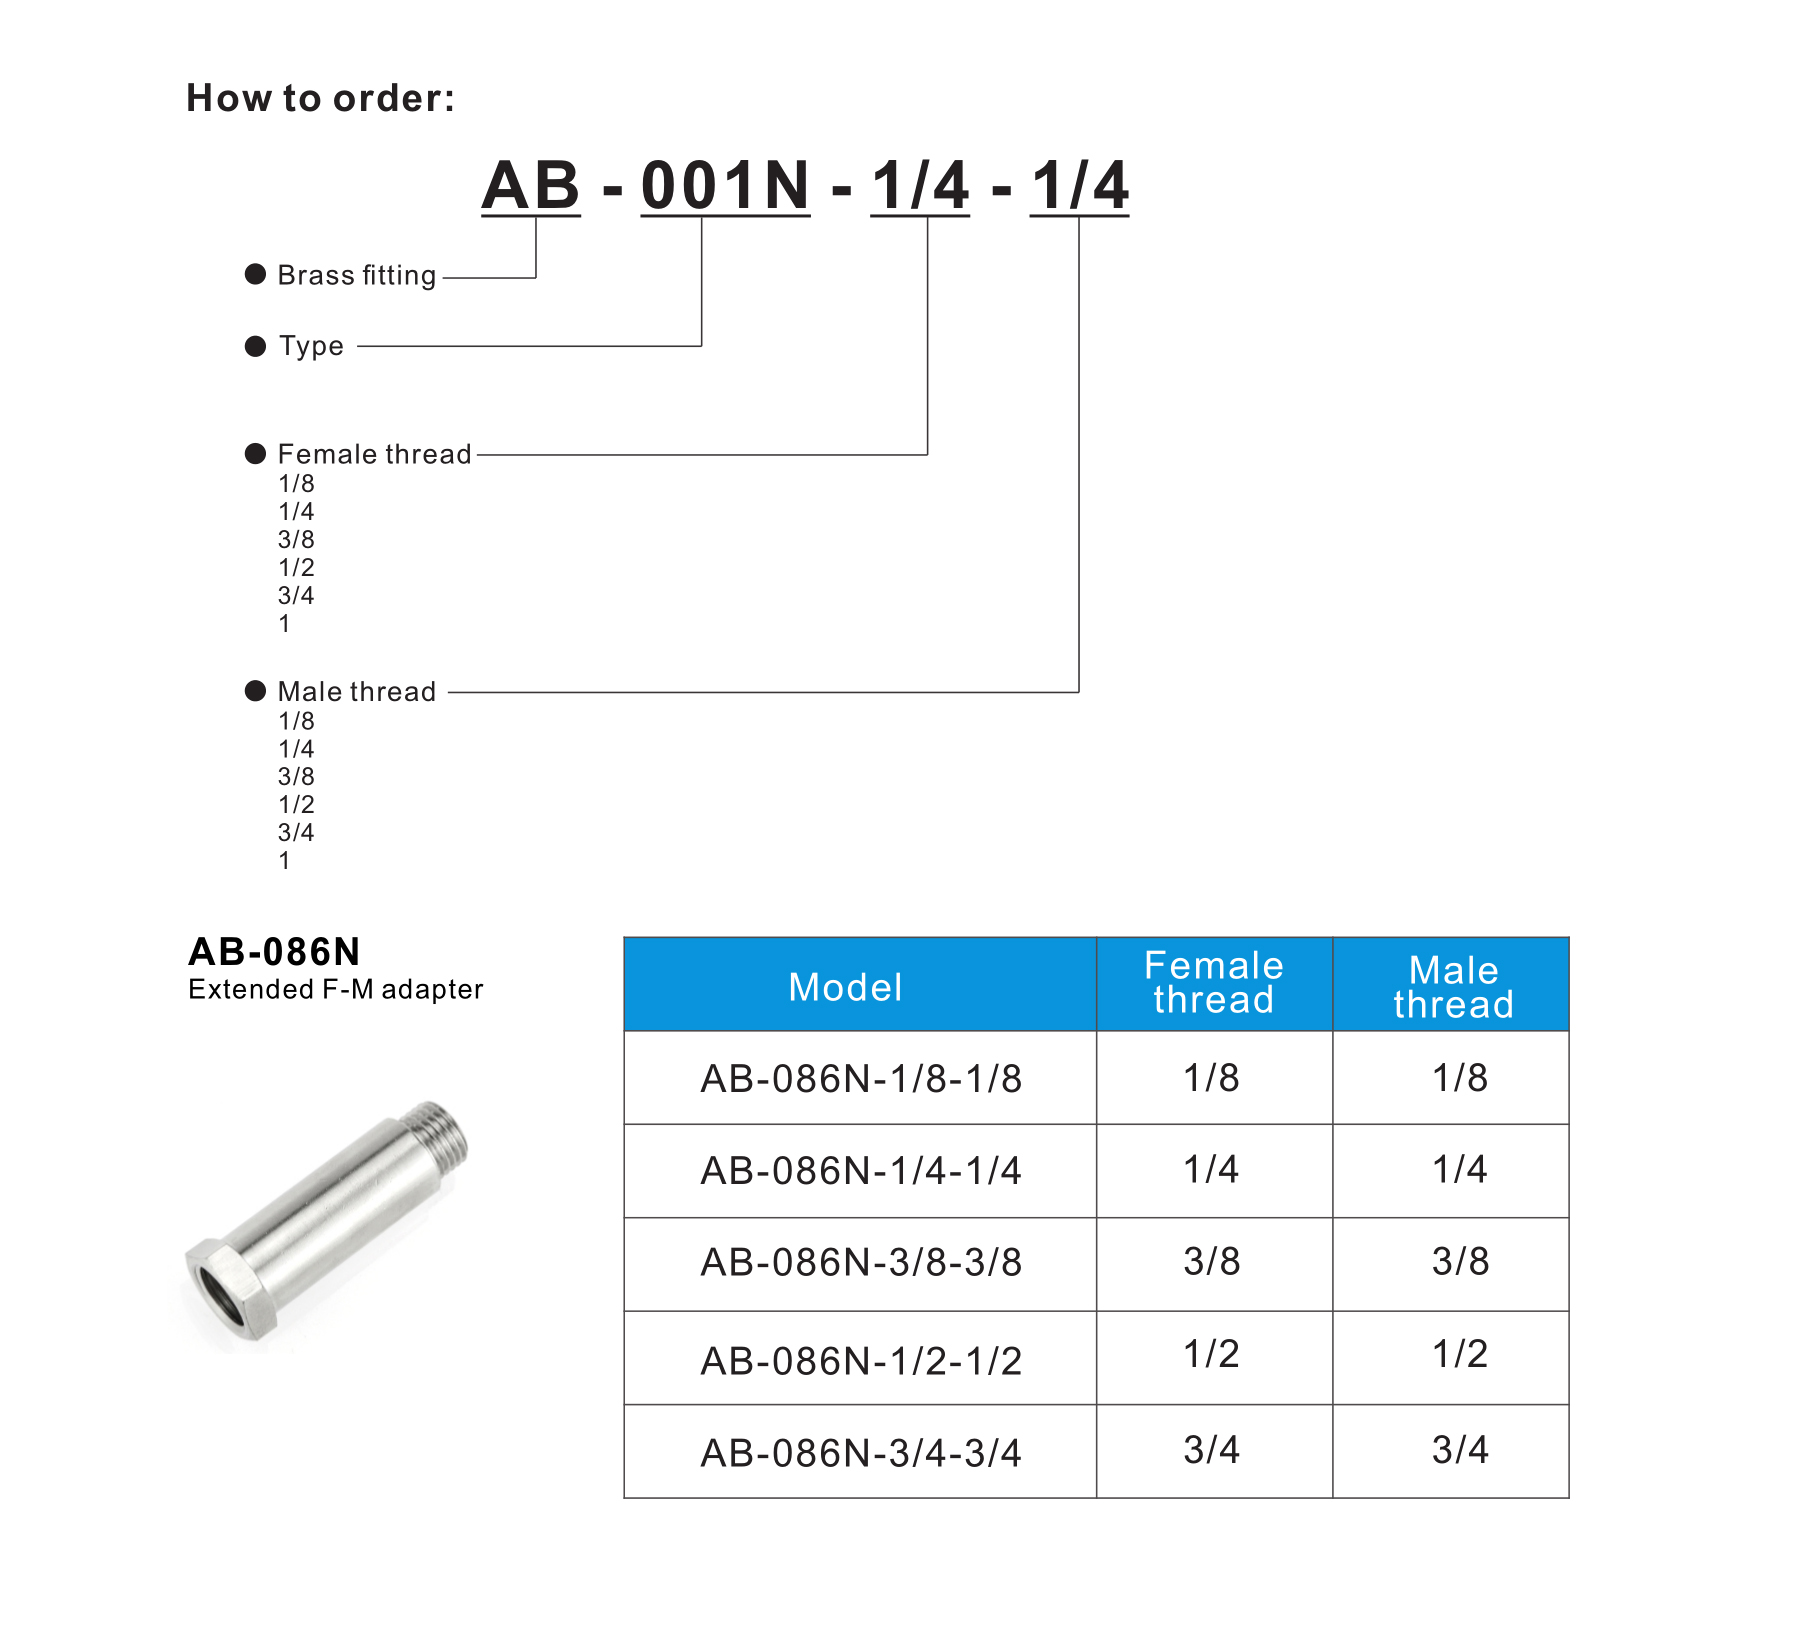 AB-086N Extended F-M adapter